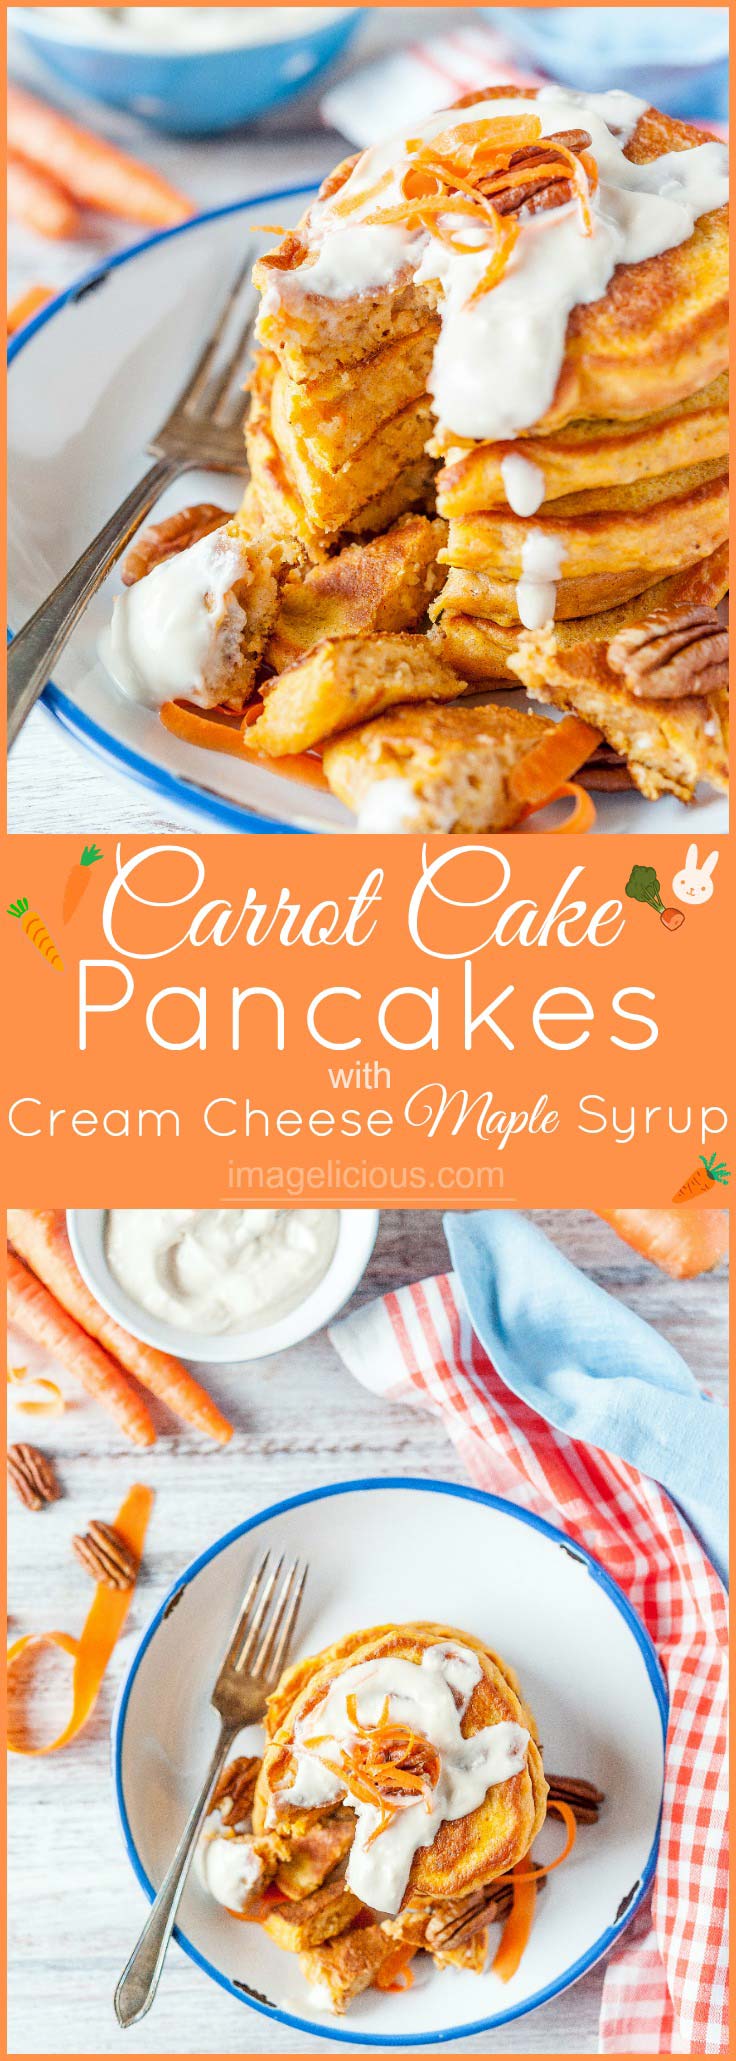 Carrot Cake Pancakes with Cream Cheese-Maple Syrup are a perfect and healthy breakfast yet they taste like dessert. Packed with carrots, oats and yogurt they will satisfy even picky eaters. Serve them for Easter breakfast or any special weekend treat | Imagelicious